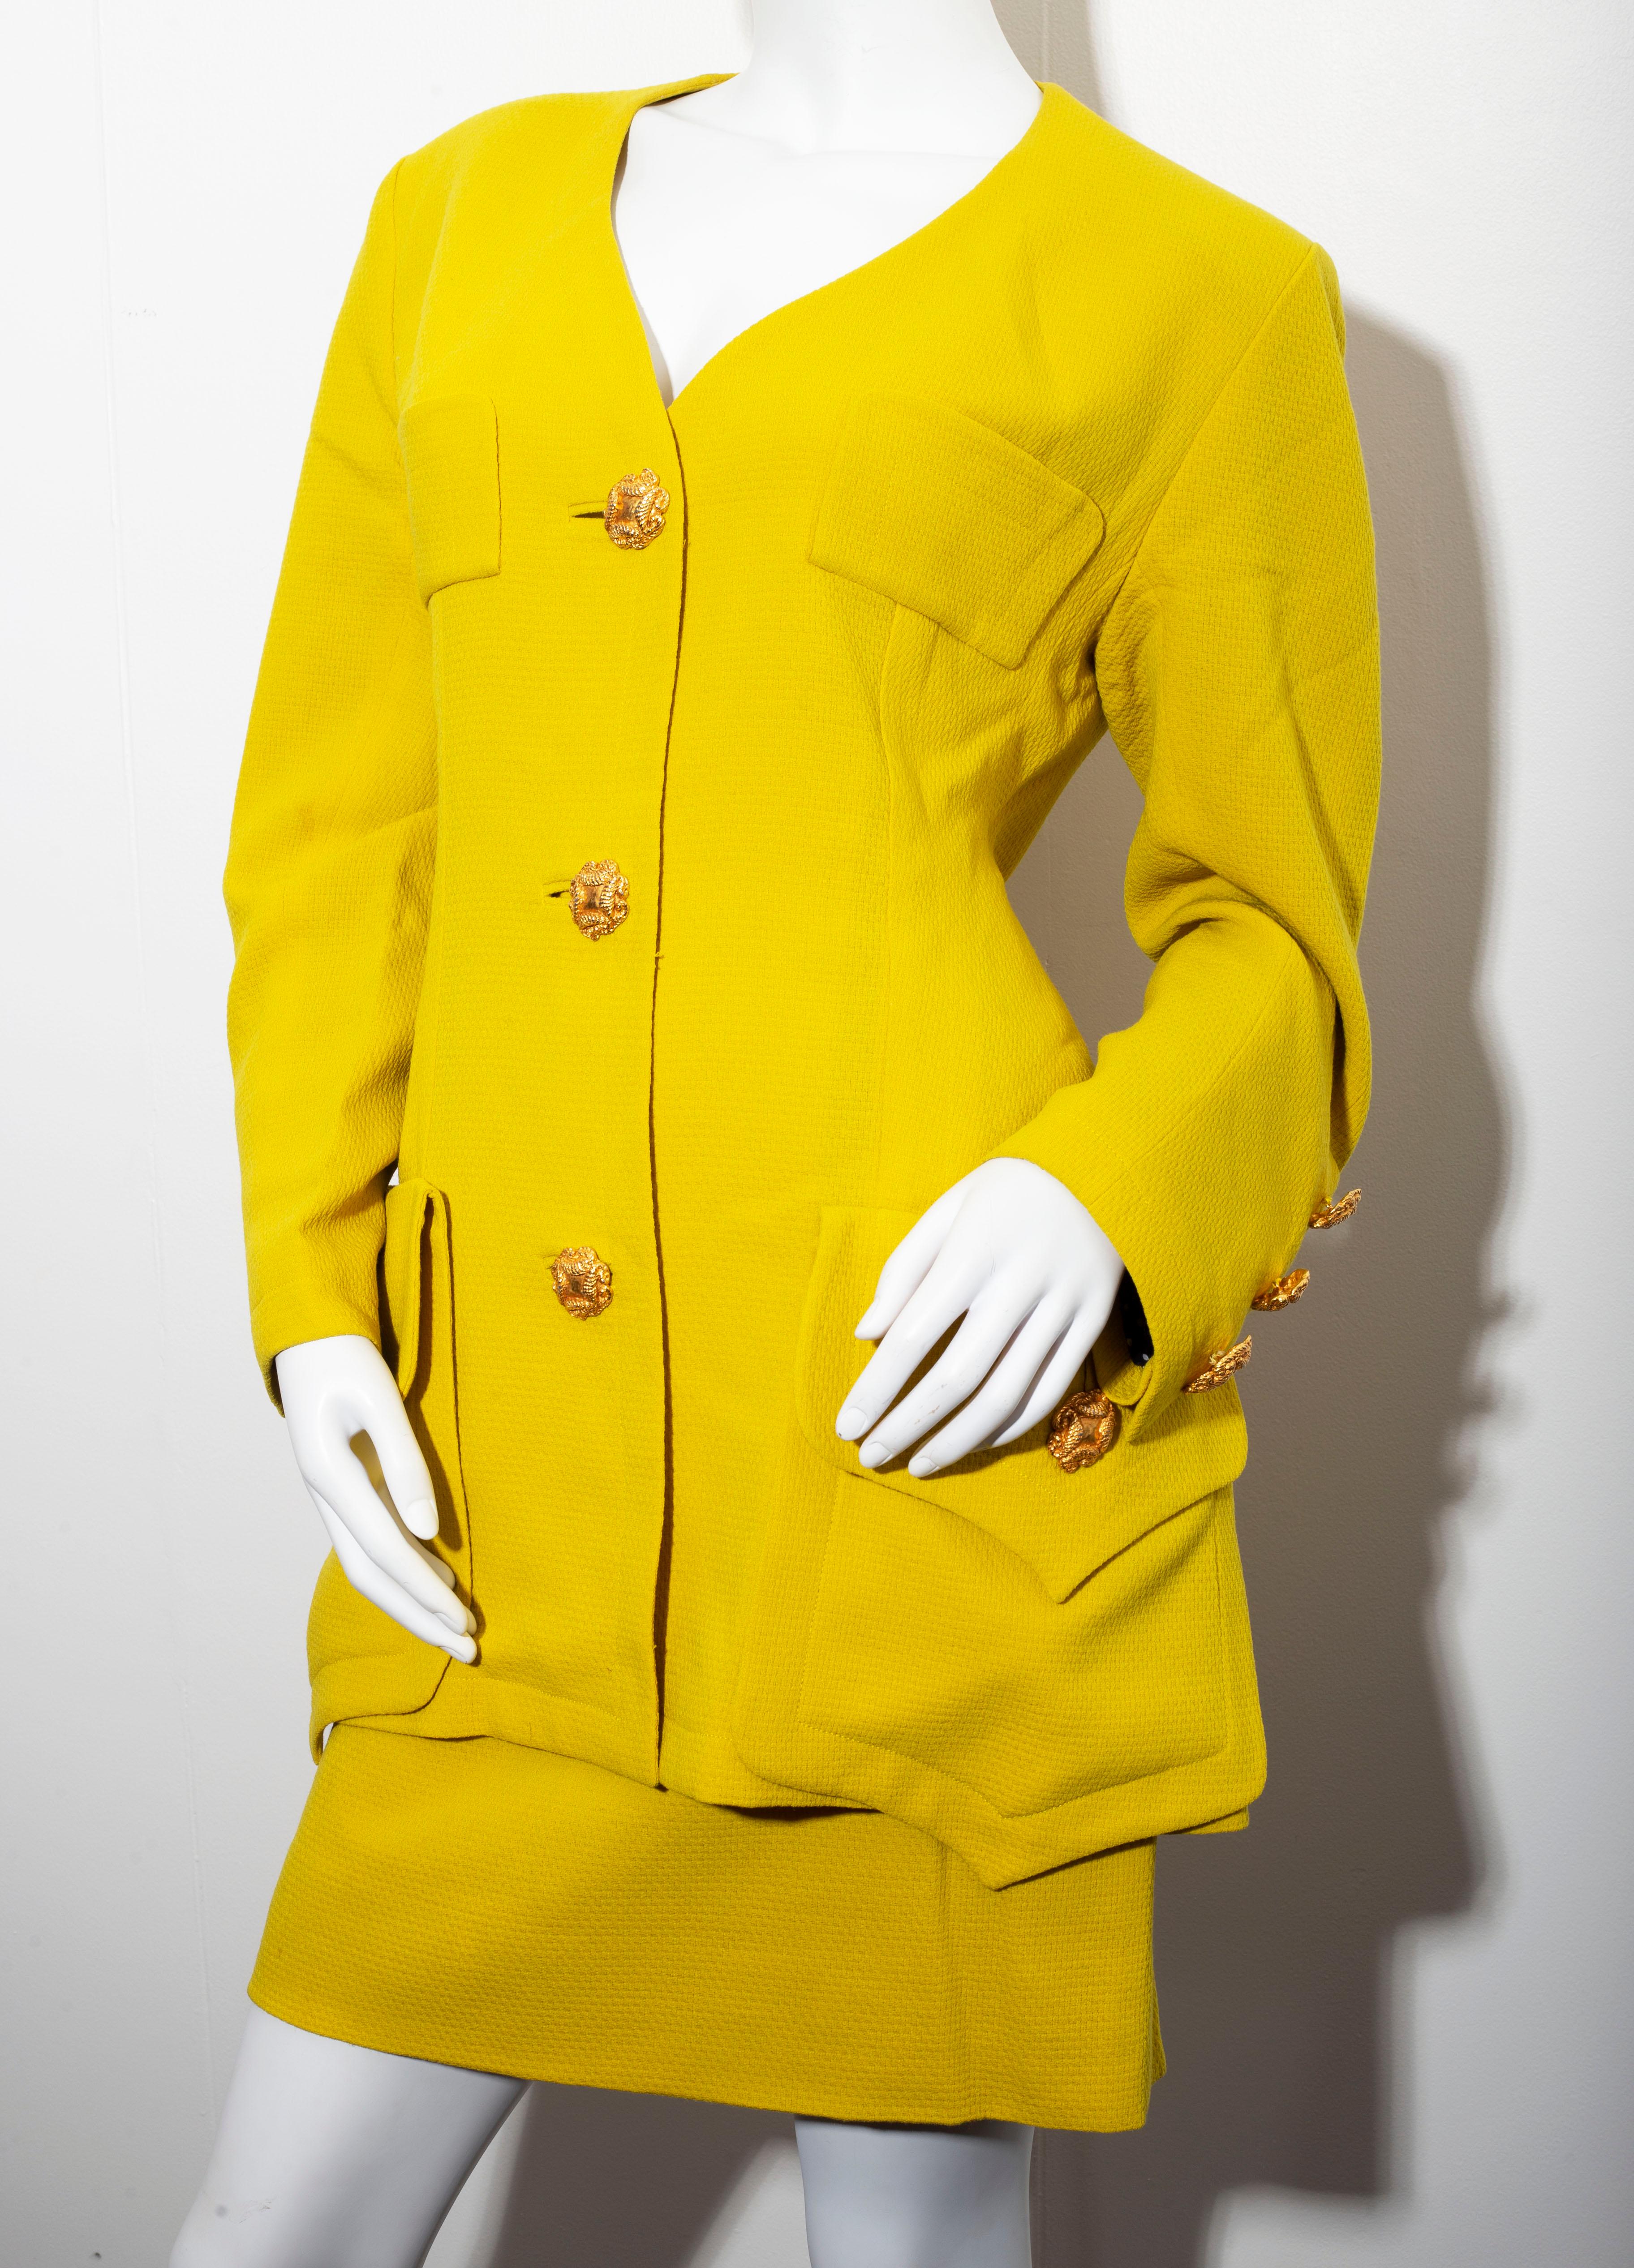 Mustard yellow Christian Lacroix  work suit in freeze wool size 42Christian Lacroix summer polkadot spattern silk inside suit 
Reviving Paris couture, Lacroix used a flouncing, textural mix with a style of theatricality. With his background in